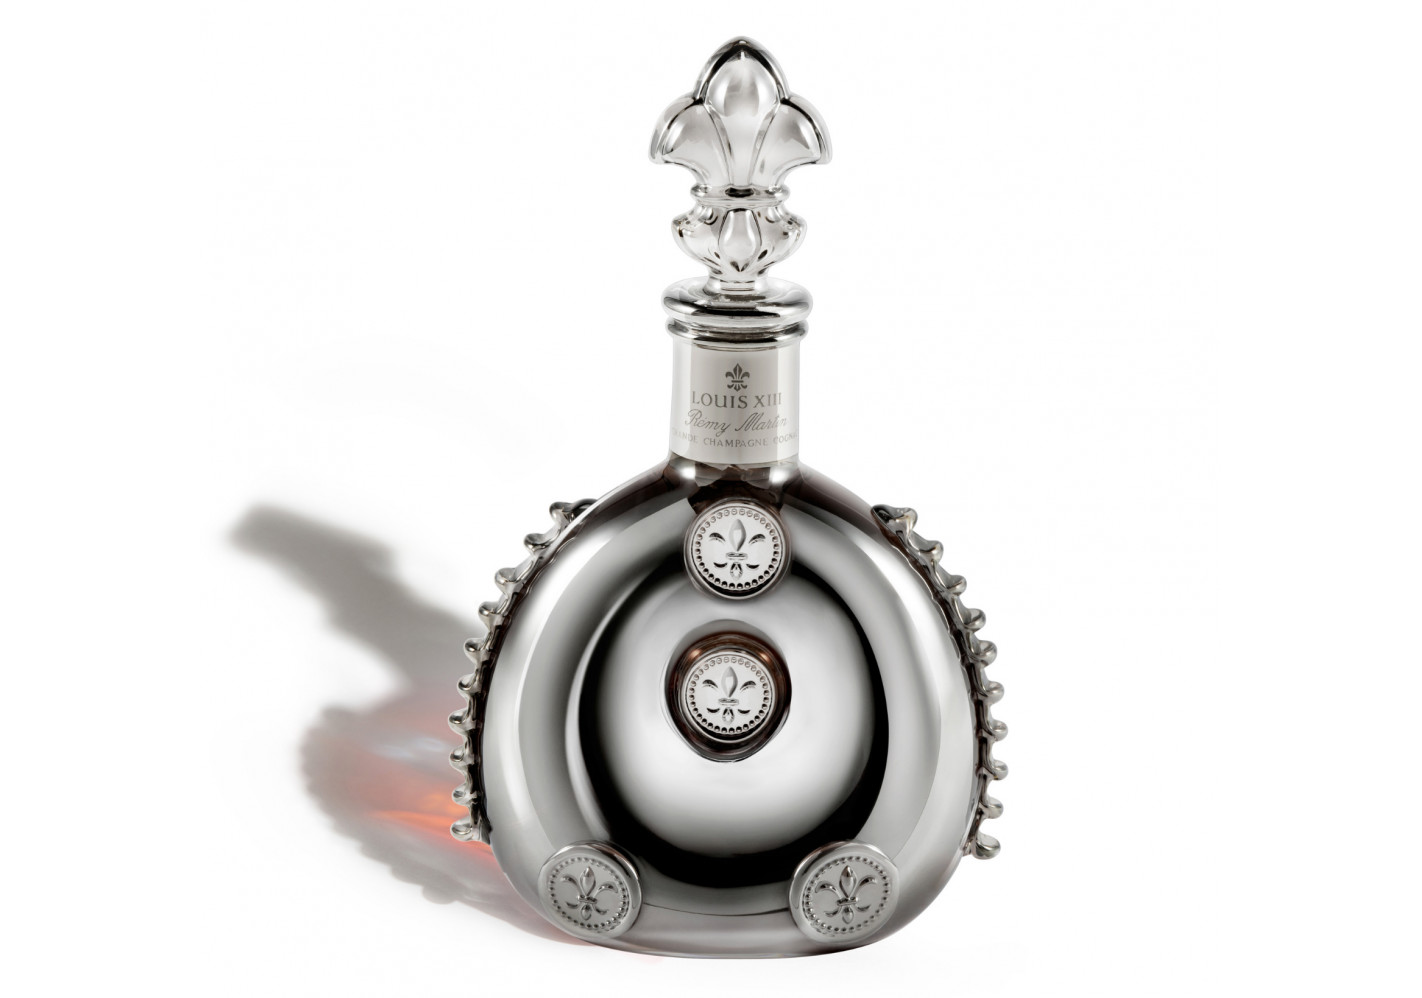 Remy Martin Louis XIII Black Pearl 40.0 abv NV (1.5 Litre), Finest Whisky, Iconic Vintages From The Macallan Distillery, Spirits